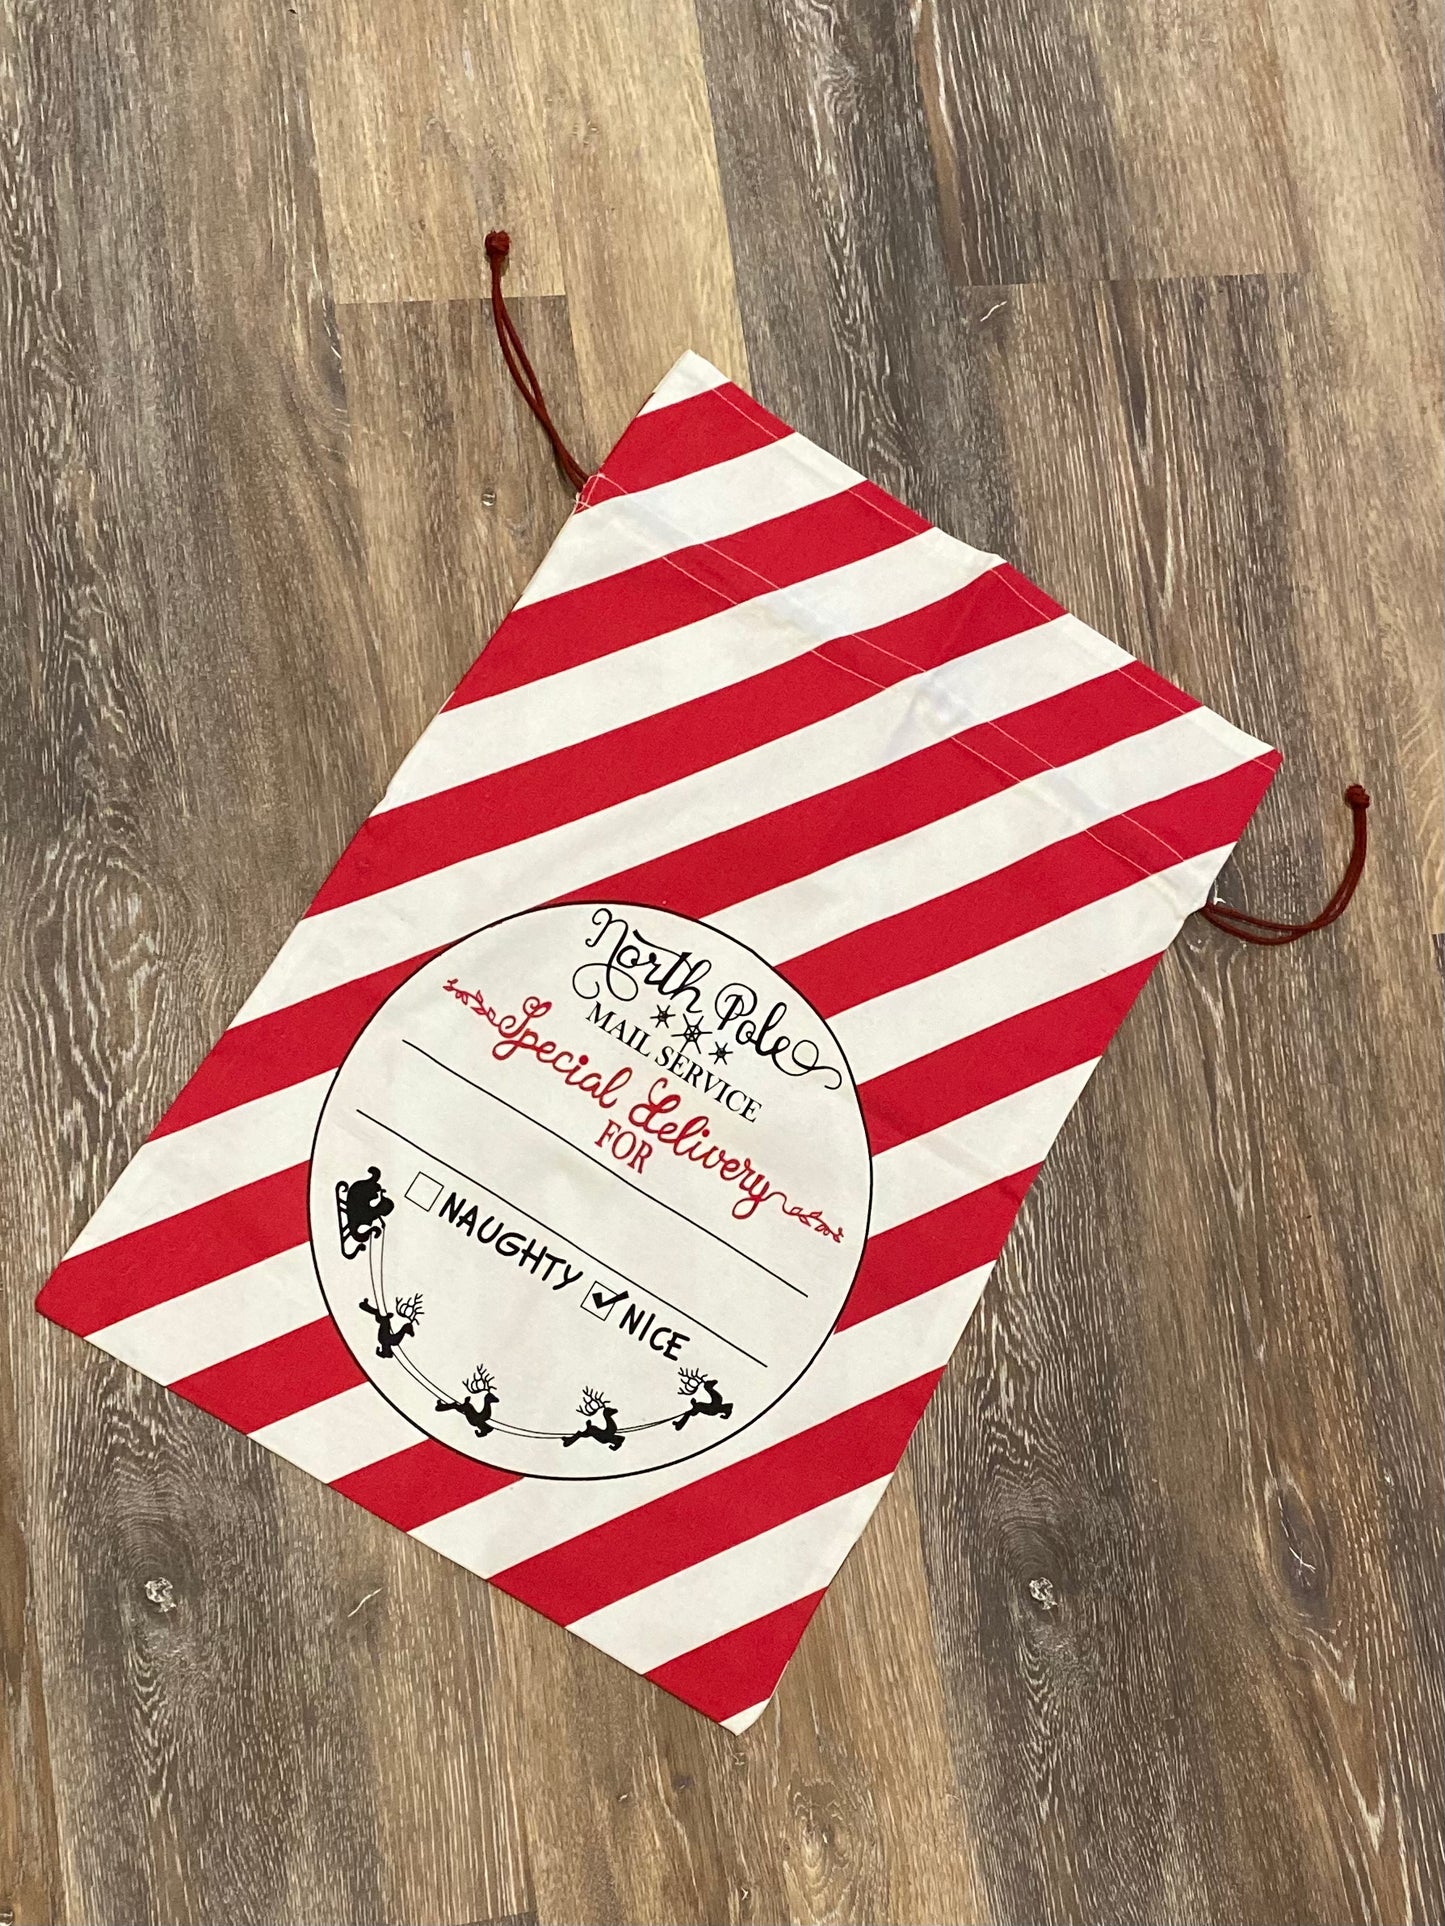 Personalized Santa Mail Service Cinch Tight Gift Bag